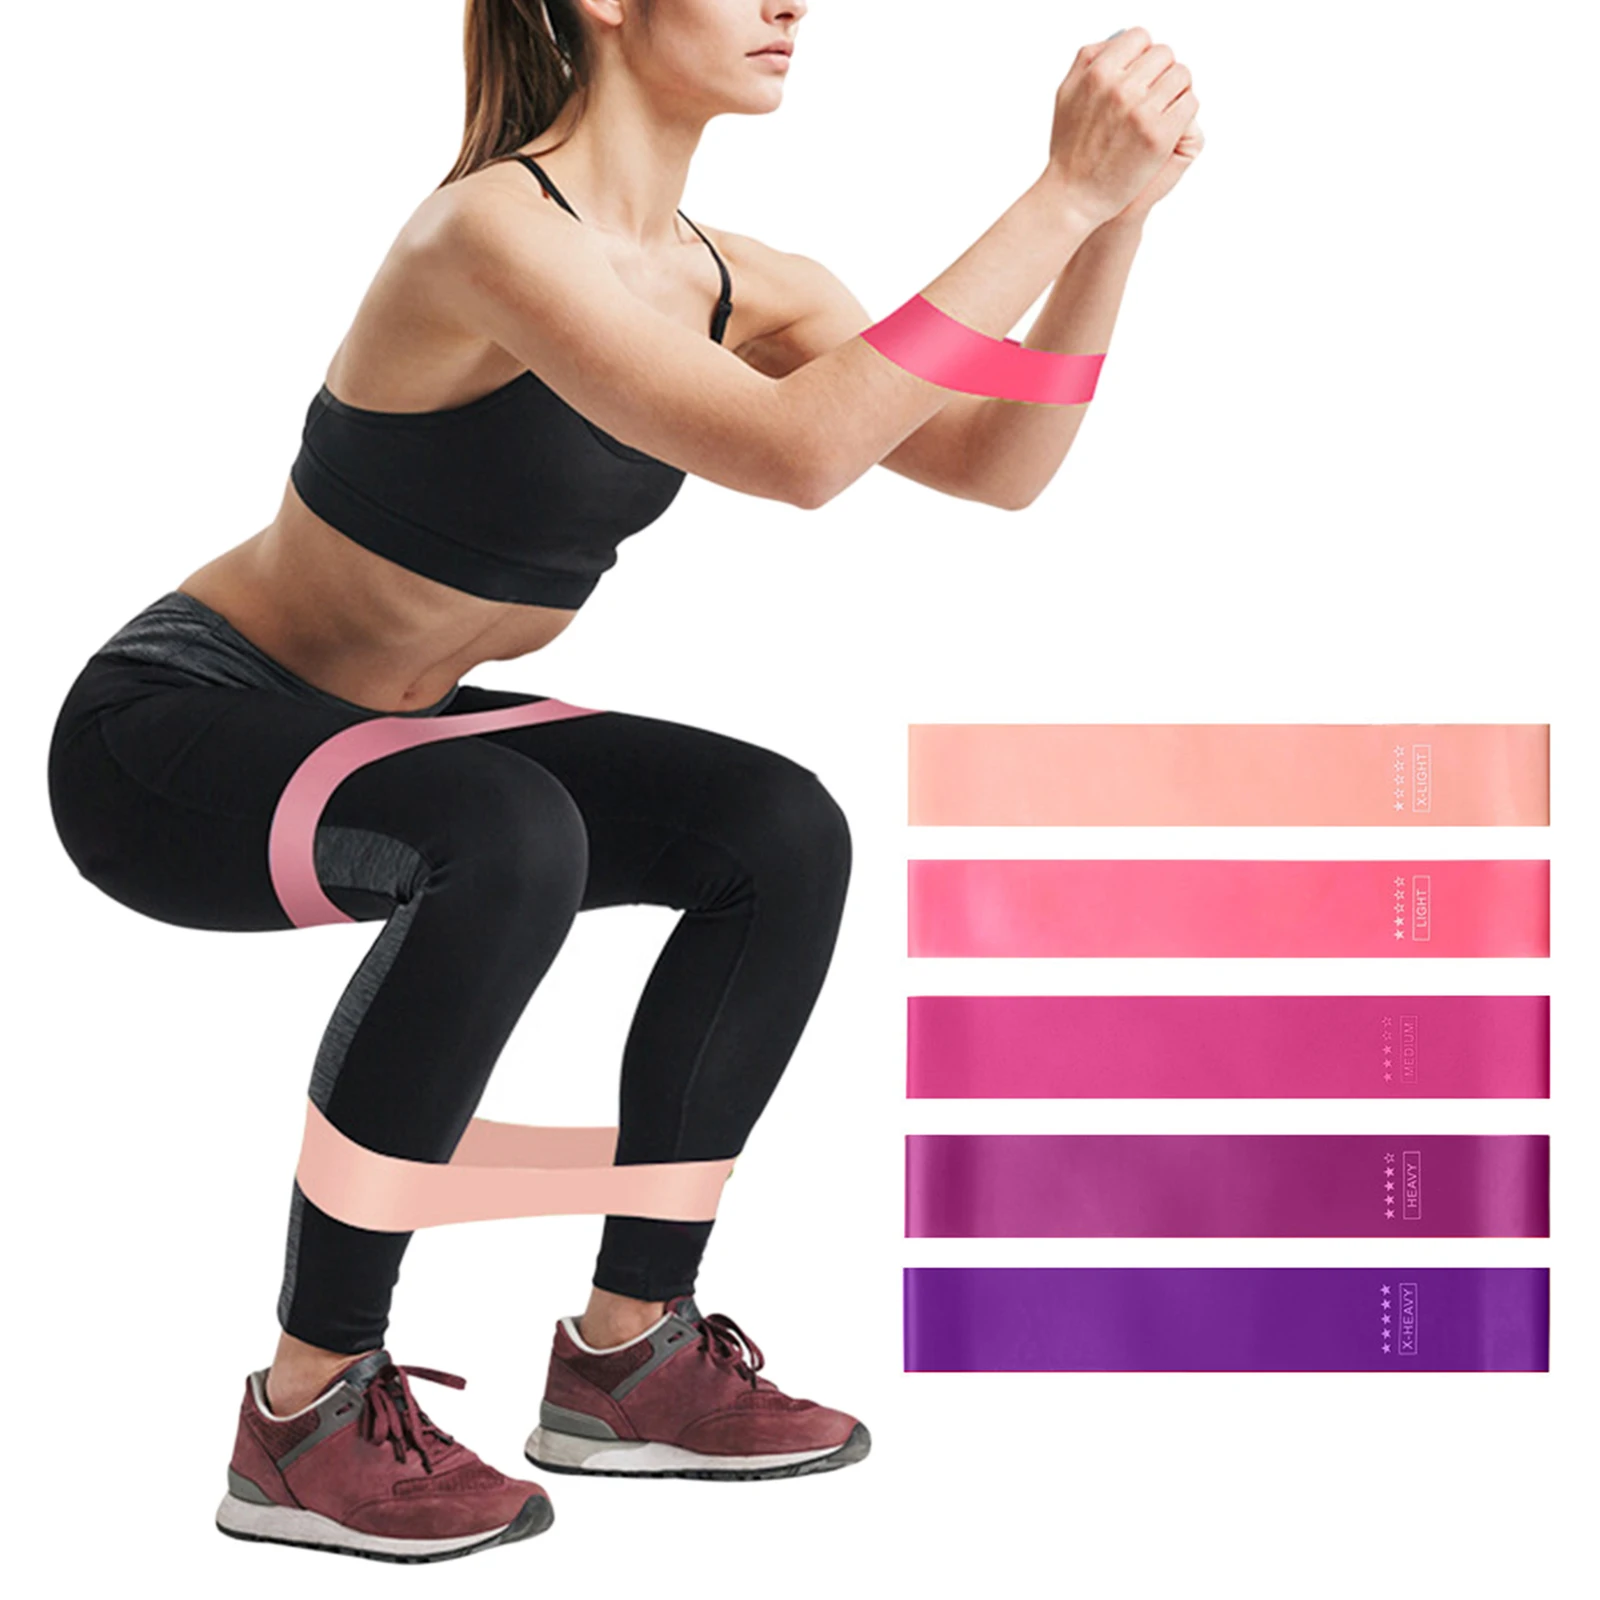 Fitness Gym Resistance Band for Upper & Lower Body Core Exercise At-Home Workouts Rehab Legs and Butt Exercise